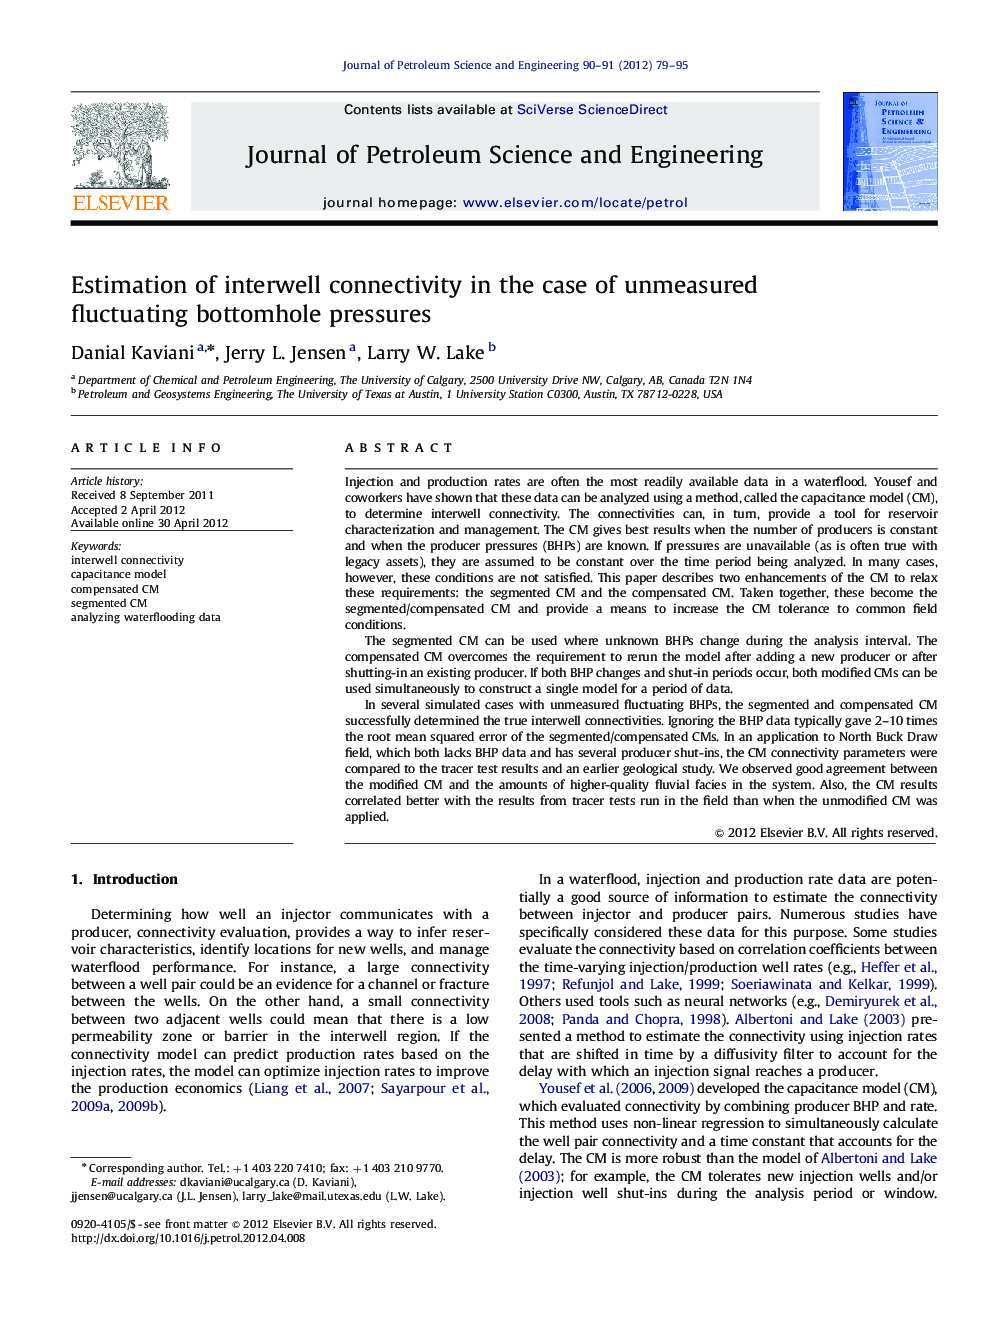 Estimation of interwell connectivity in the case of unmeasured fluctuating bottomhole pressures